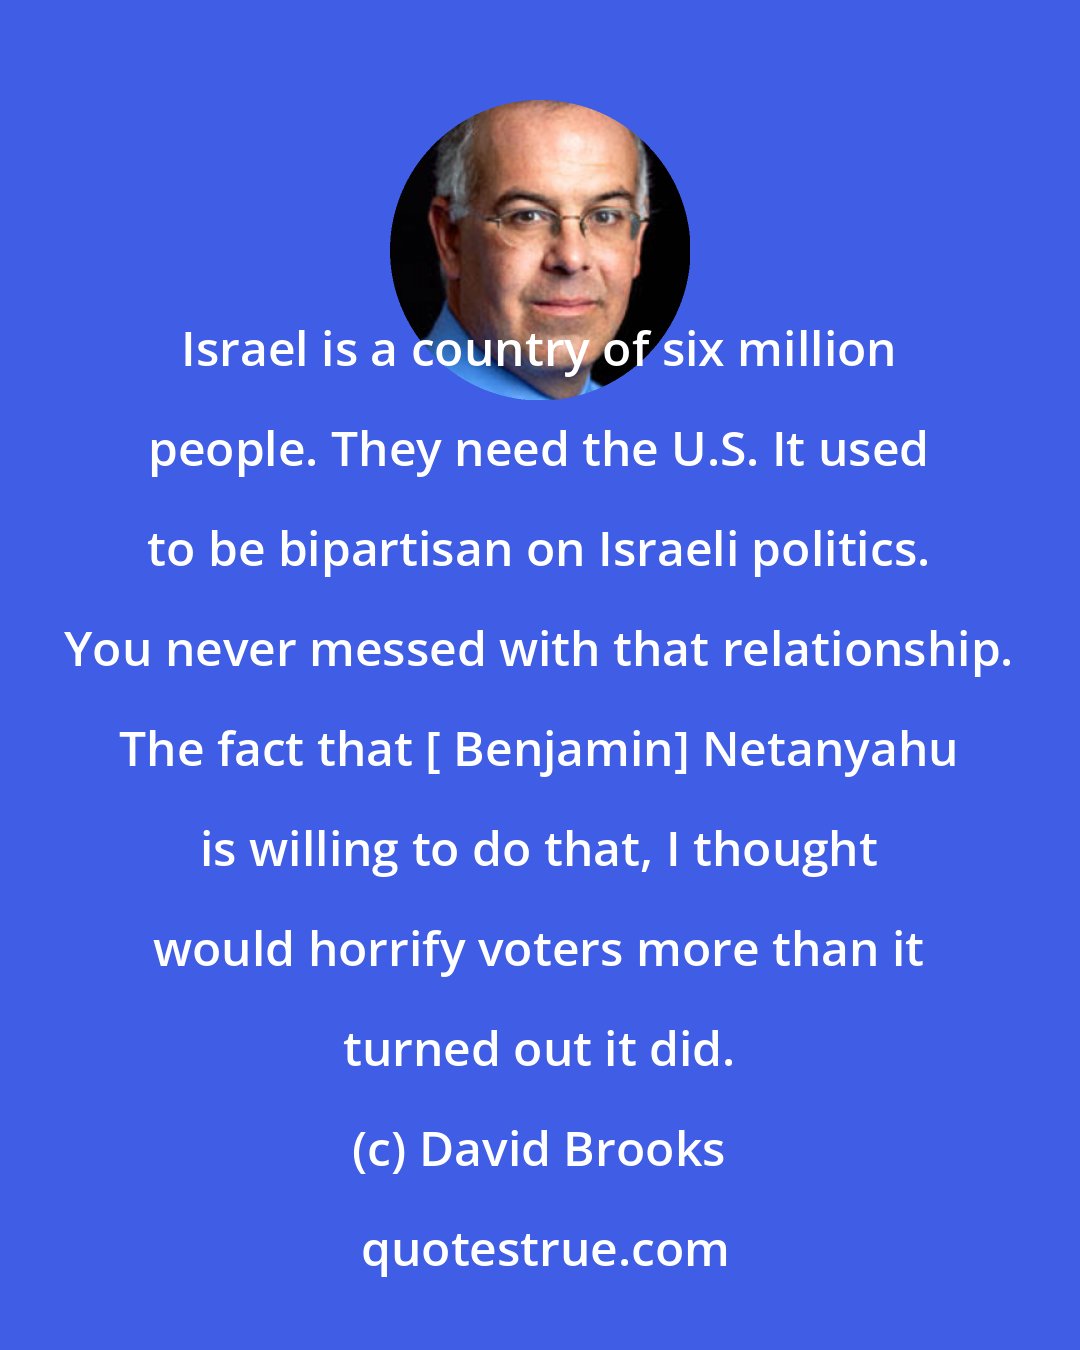 David Brooks: Israel is a country of six million people. They need the U.S. It used to be bipartisan on Israeli politics. You never messed with that relationship. The fact that [ Benjamin] Netanyahu is willing to do that, I thought would horrify voters more than it turned out it did.